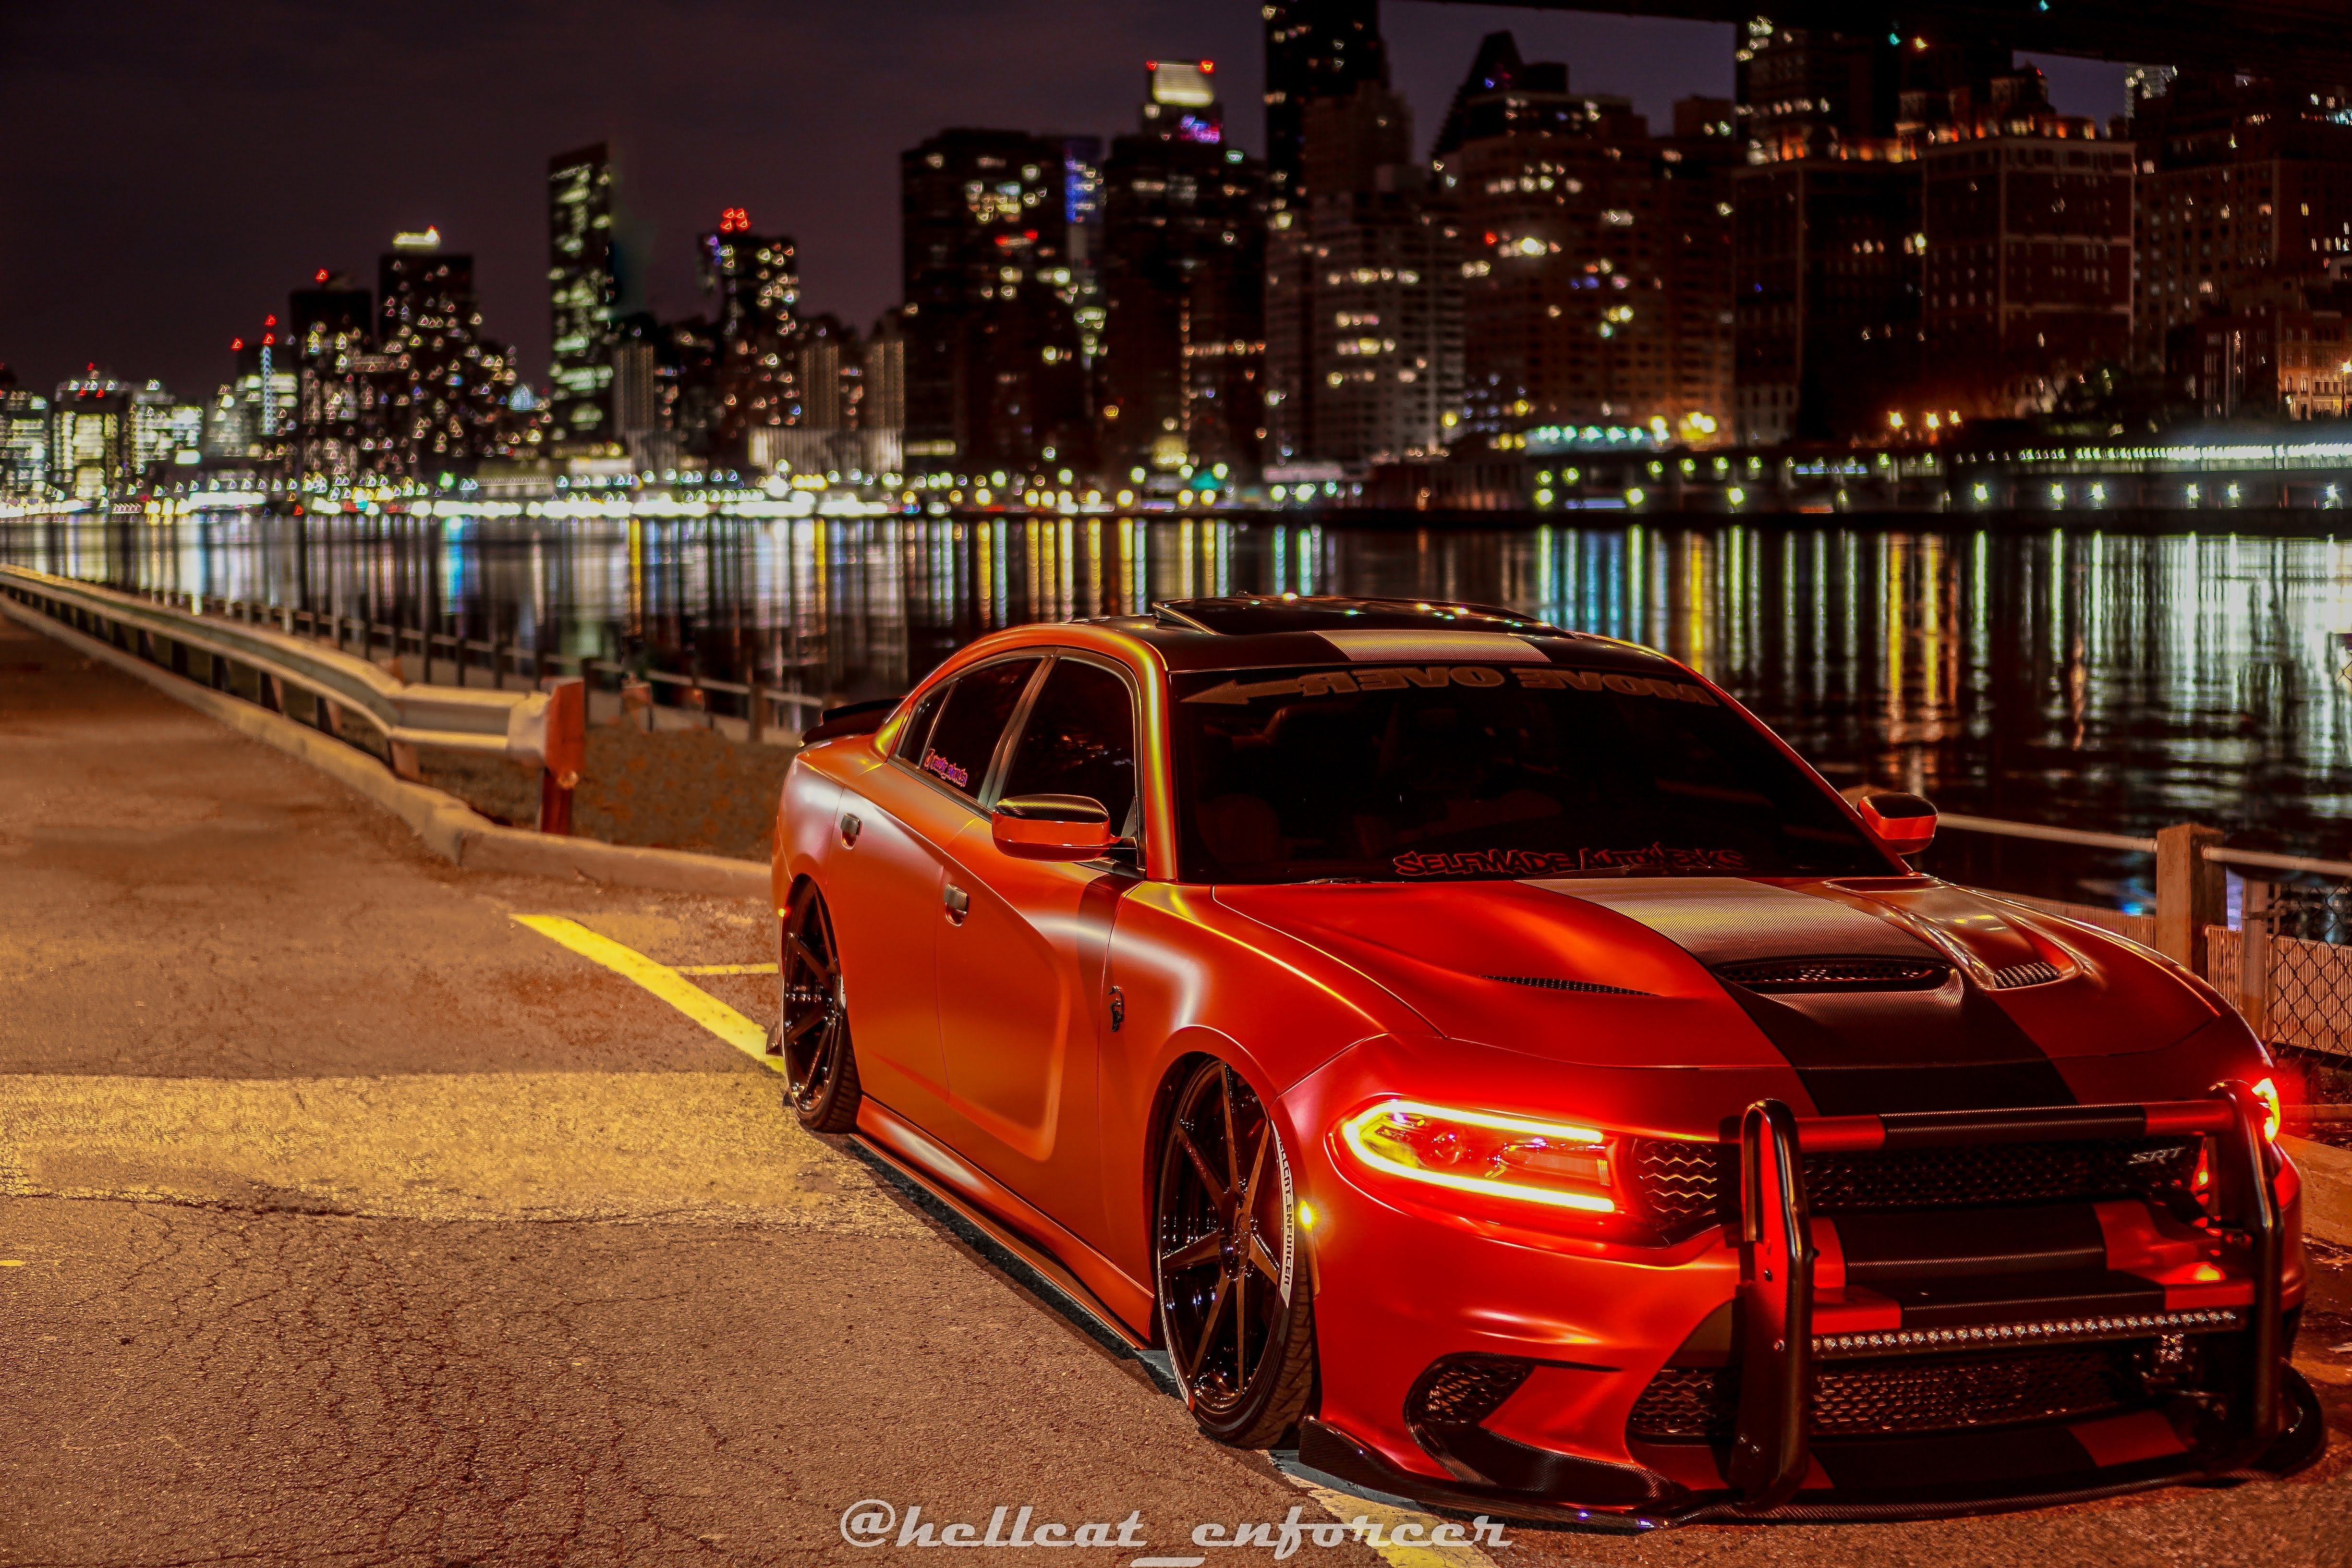 Red Dodge Charger SRT with Carbon Fiber Vented Hood - Photo by @hellcat_enforcer